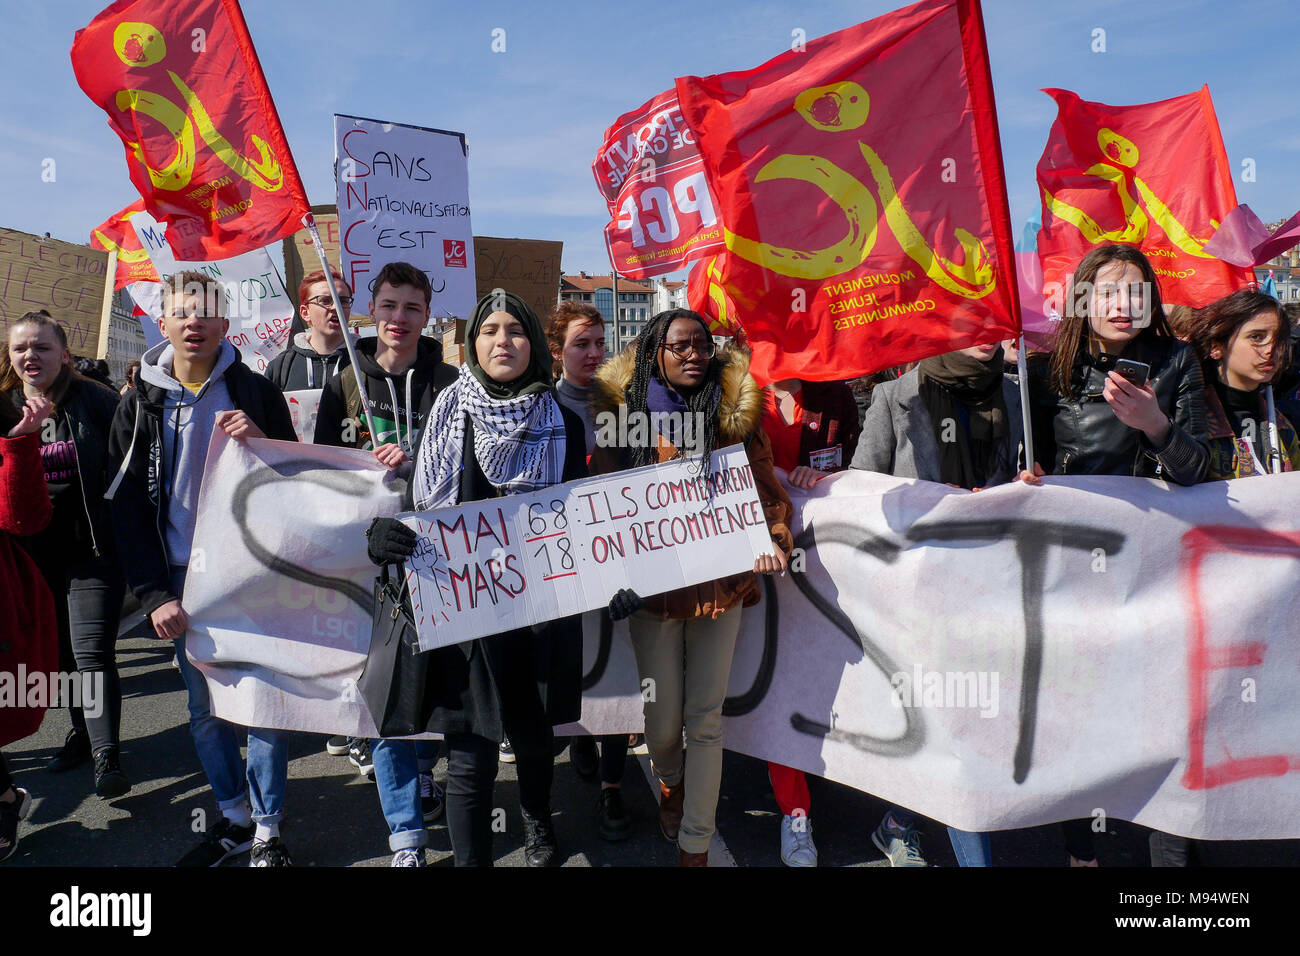 Lyon, France, 22nd March 2018: Called by trade unions and left wing parties, protesters including school and hospital staff, civil servants, rail workers, students and collegians, are seen in Lyon (Central-Eastern France) on March 22, 2018, as they take part in a demonstration held against French government's string of reforms.  In Lyon, the number of the demonstrators was estimated to more or less 10 000 people, according to the Police. Credit: Serge Mouraret/Alamy Live News Stock Photo